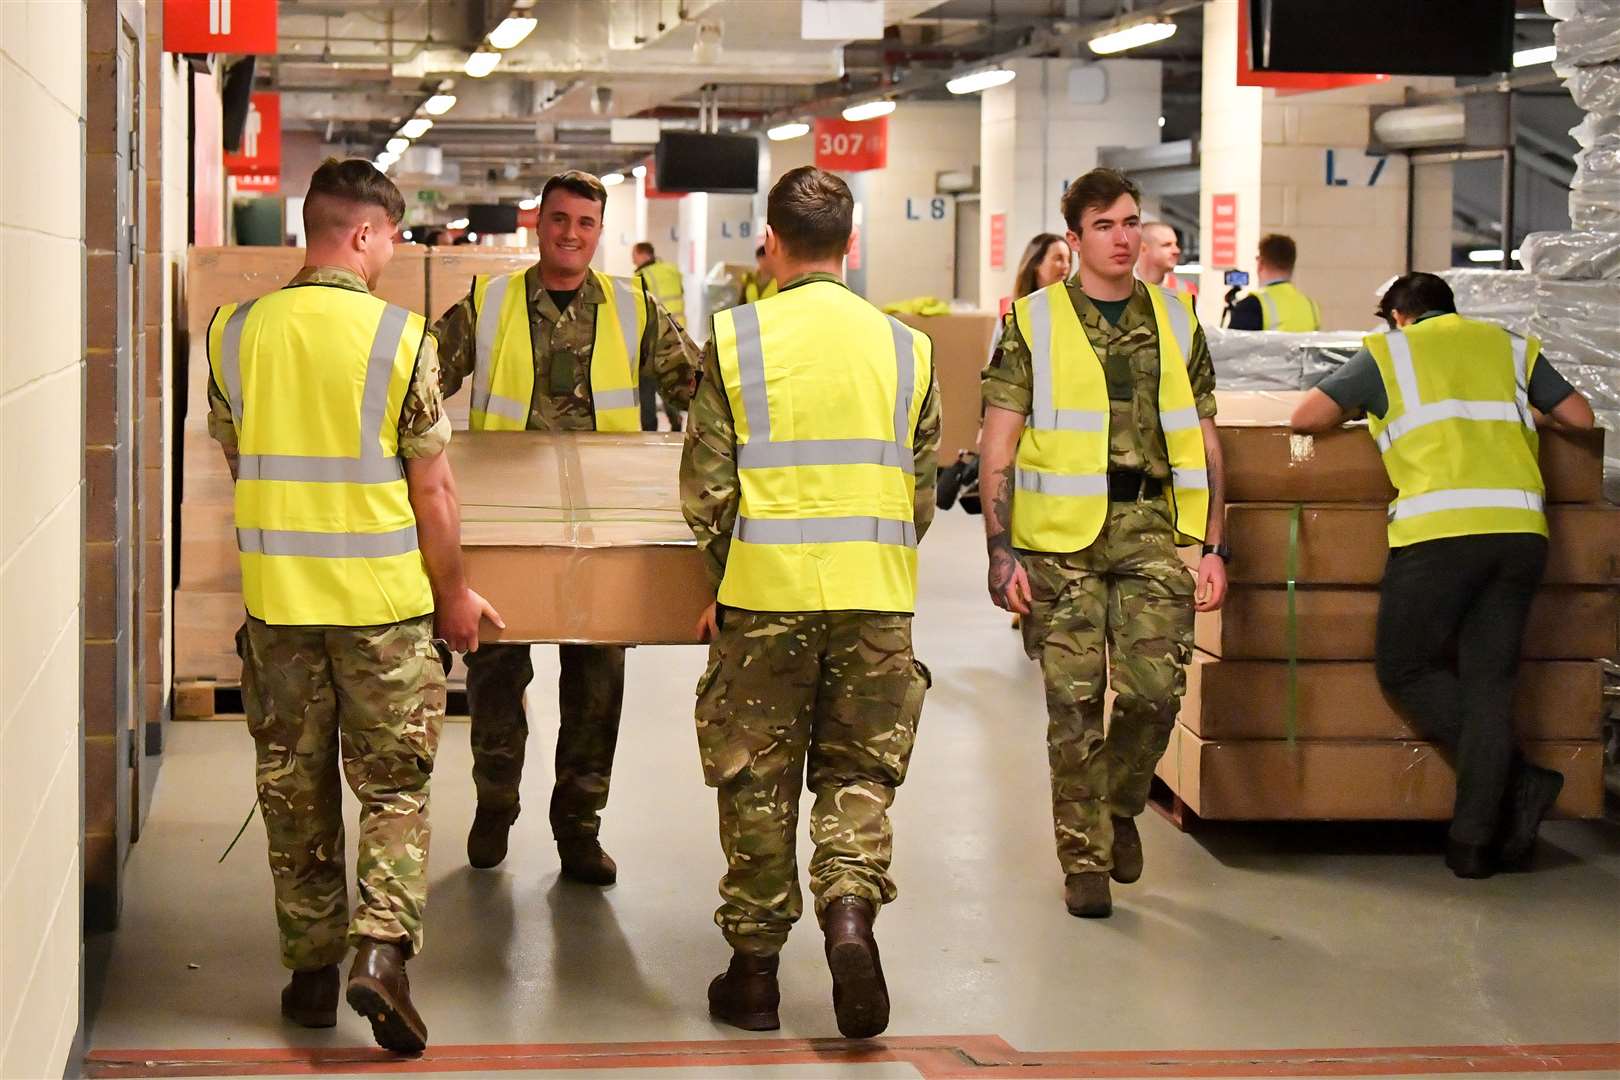 The British Army help move medical supplies at the Principality Stadium, Cardiff (Ben Birchall/PA)